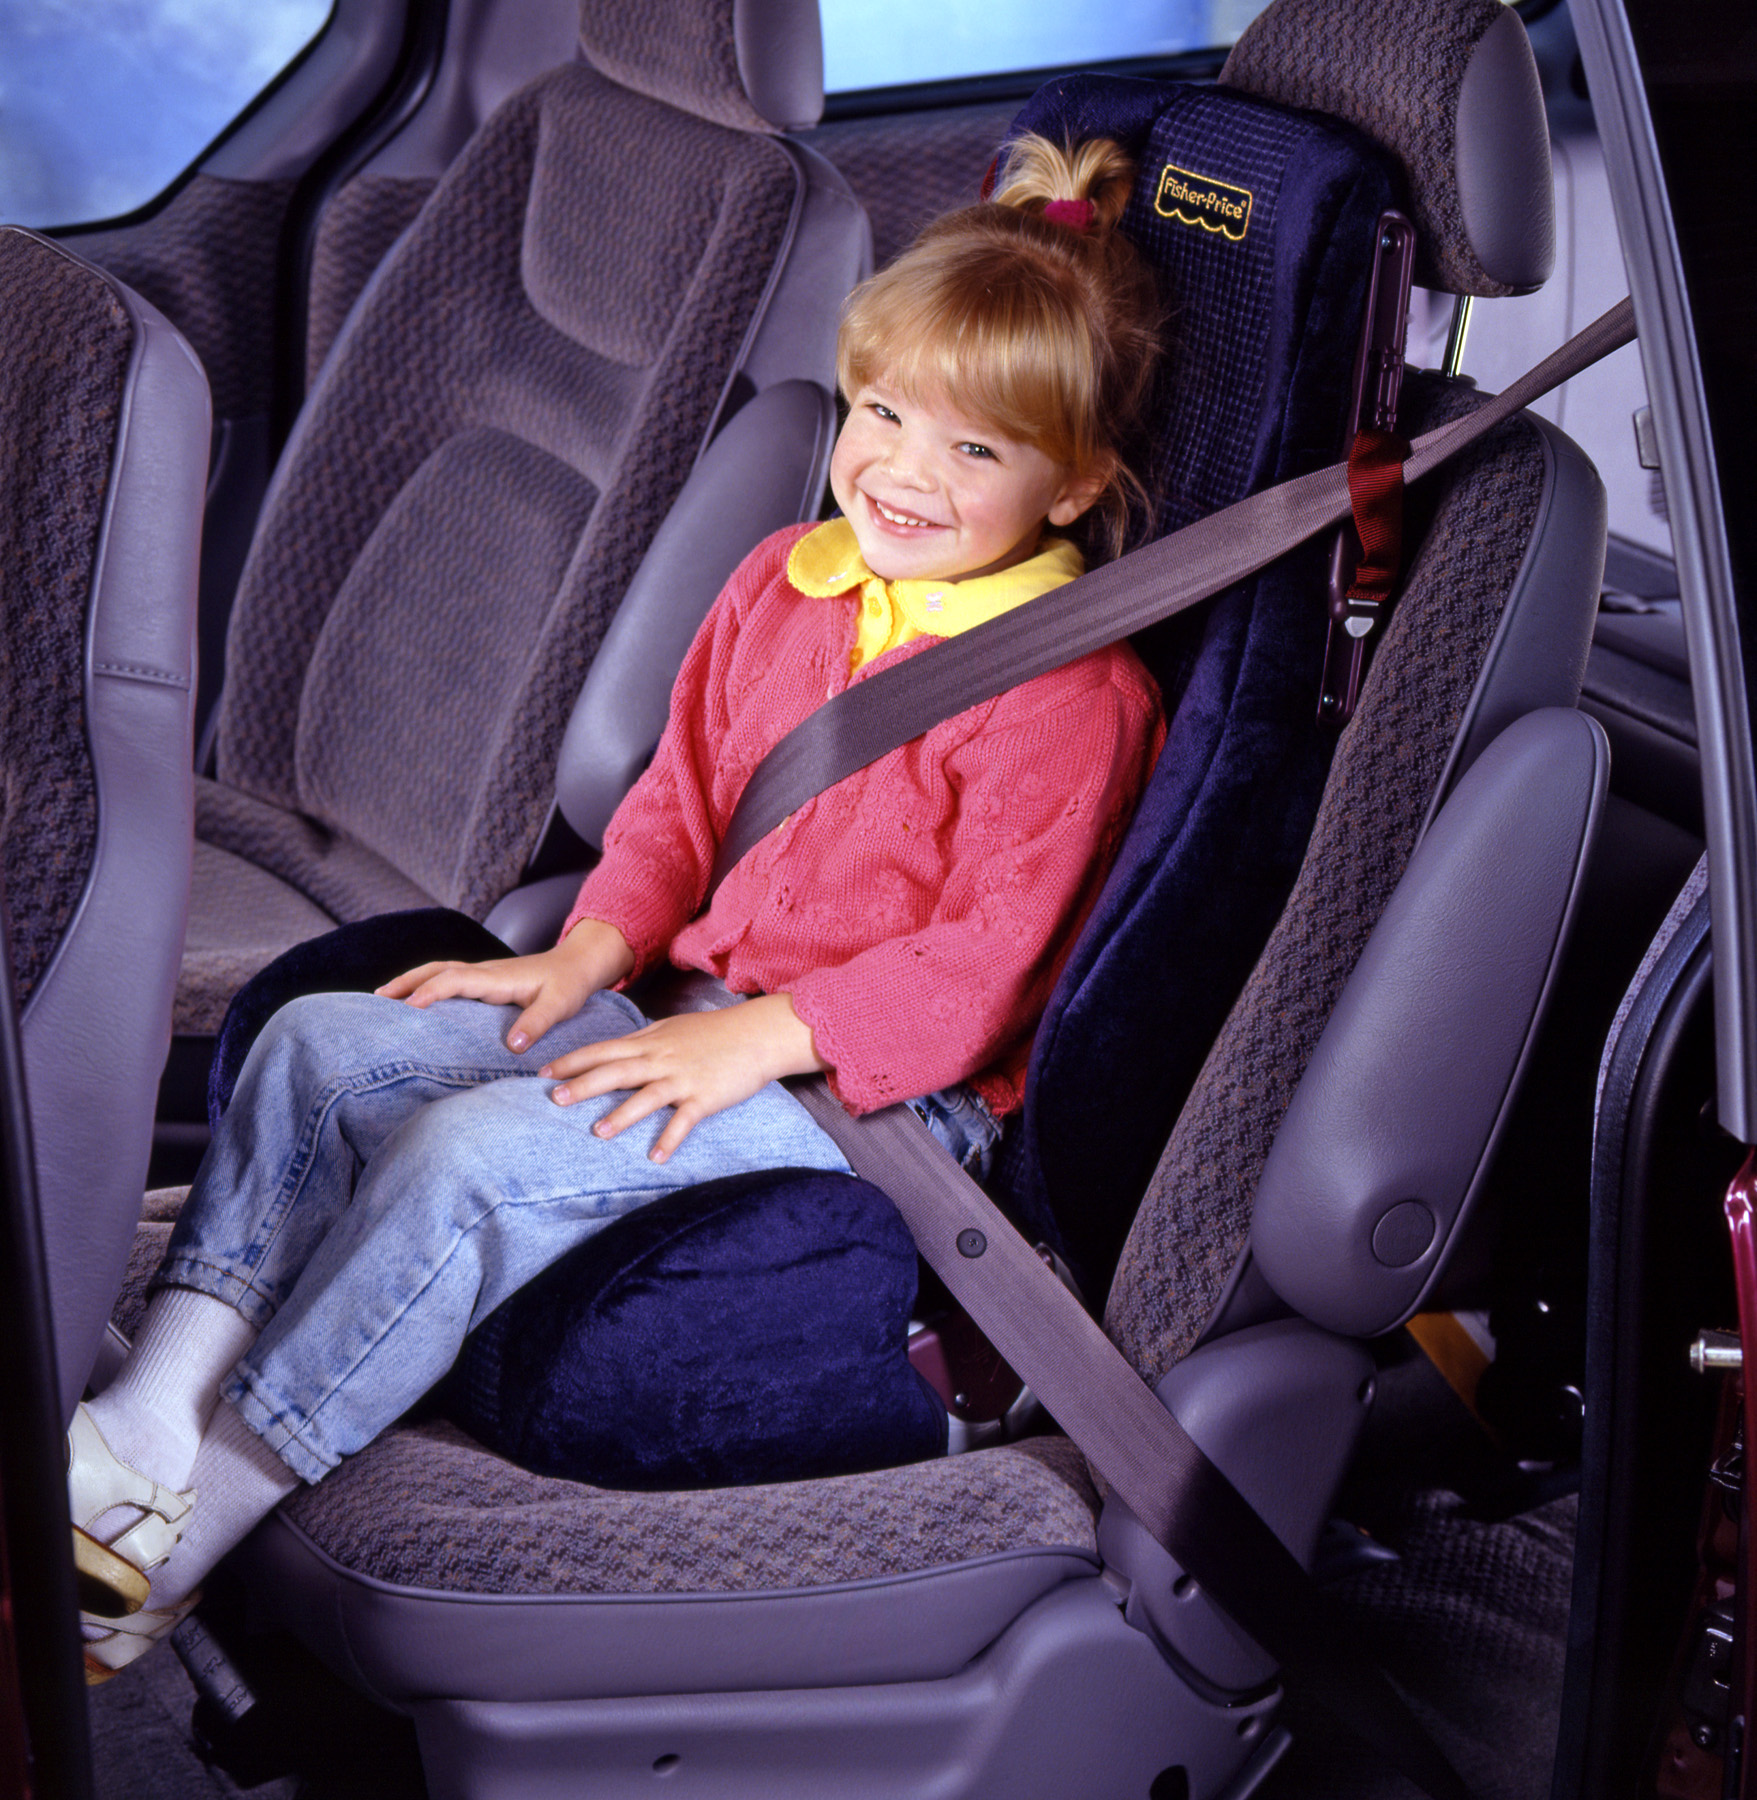 Child in Seatbelt for GGMB Safety Campaign